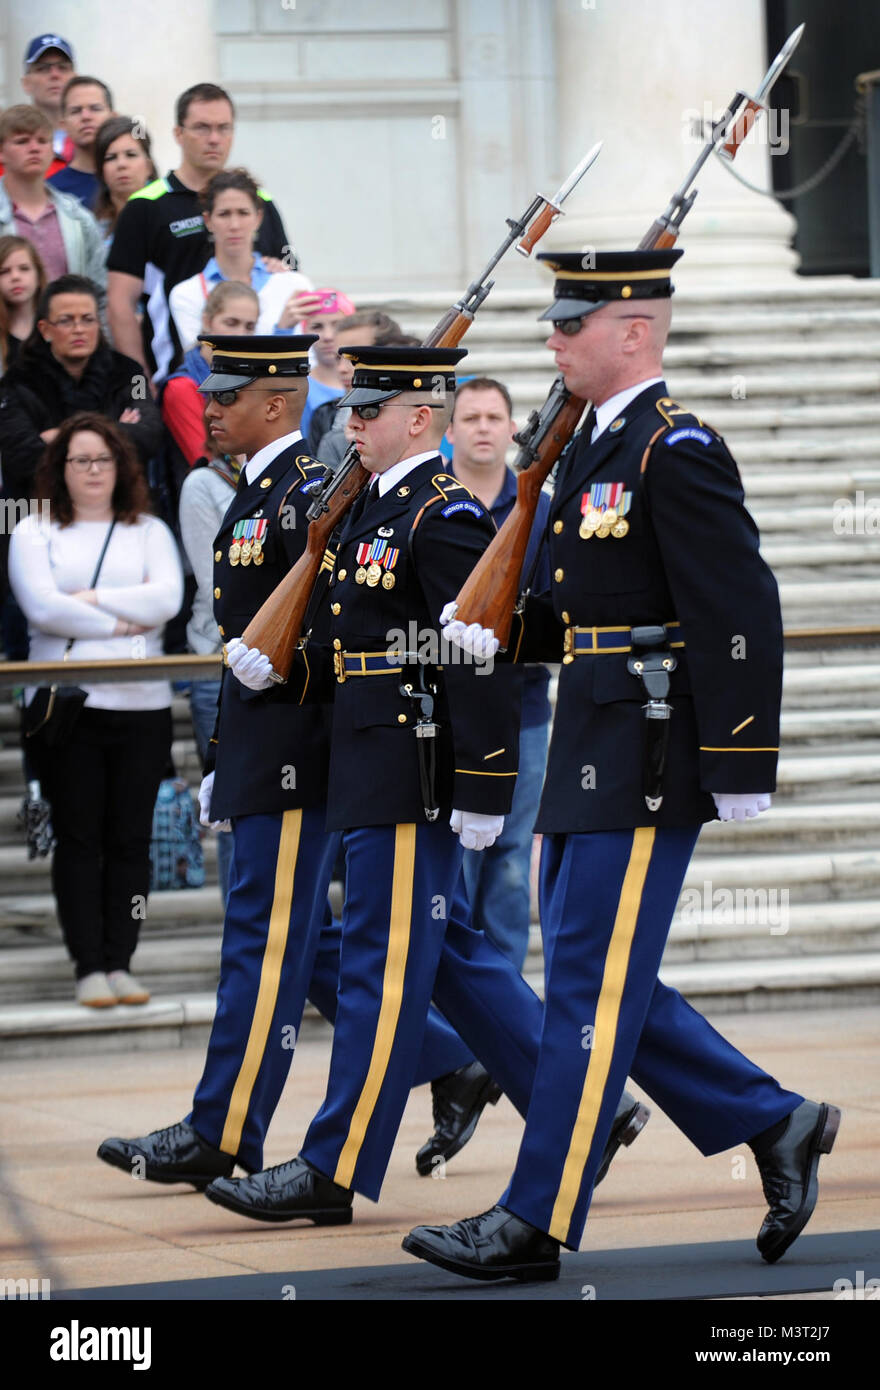 With full Ceremonial Honors presented, members of the U.S. Army Honor Guard march into place at the Tomb of the Unknowns prior to the arrival of The Right Honorable Justin Trudeau, Prime Minister of Canada. The Prime Minister was at Arlington National Cemetery to lay a wreath at the Tomb of the Unknowns in honor of the Prime Minister’s official visit to the United States. (Department of Defense photo by Marvin Lynchard) 160311-D-FW736-022 by DoD News Photos Stock Photo